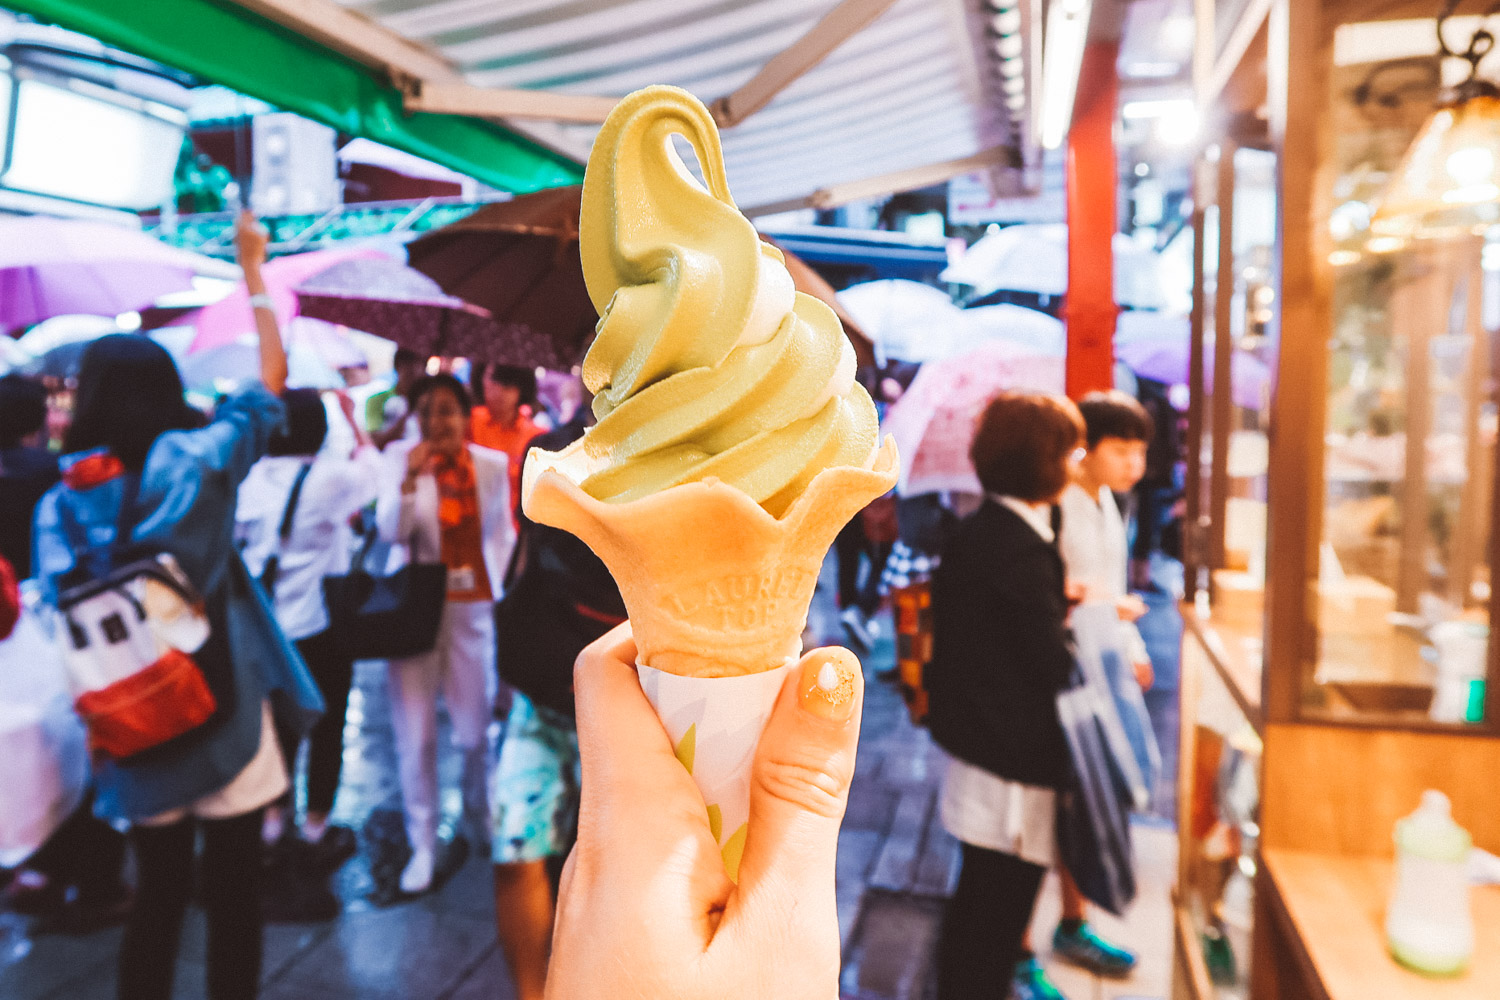 10 Local Foods to Try in Japan - Matcha Ice Cream